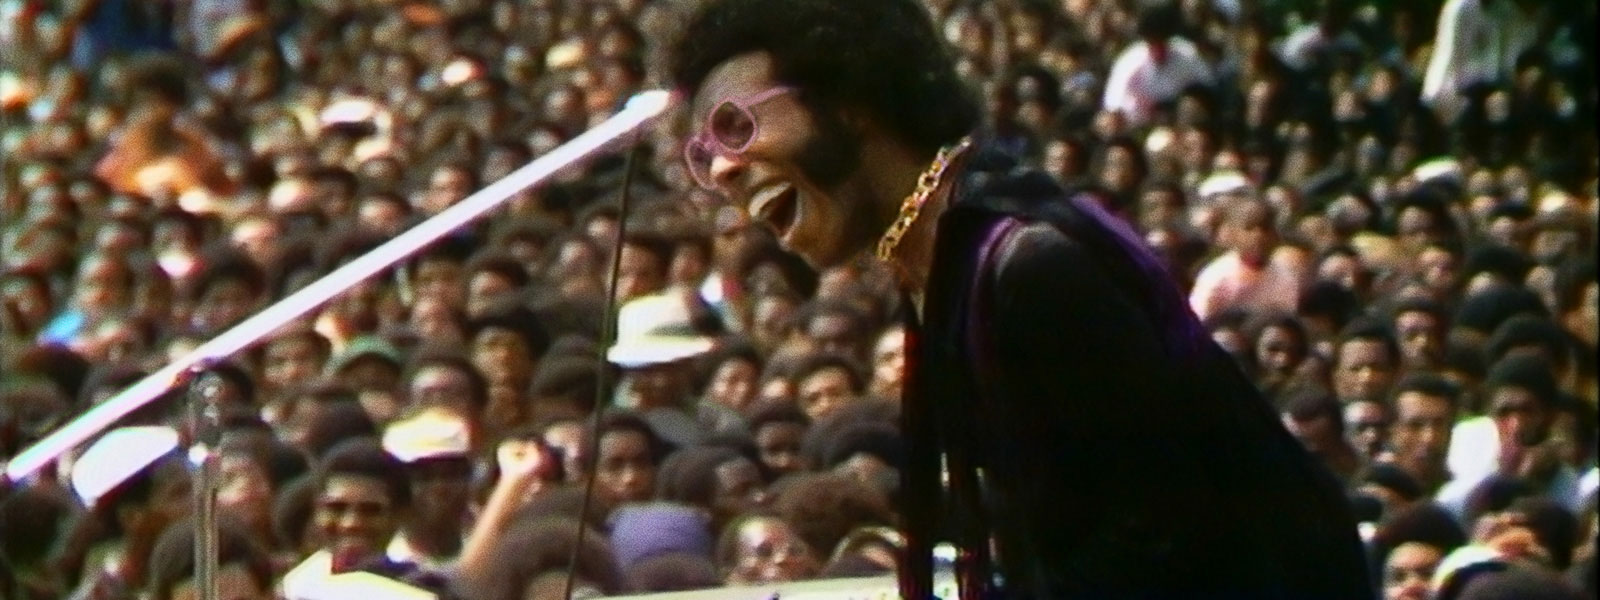 Image from 'Summer of Soul (...or, When the Revolution Could Not Be Televised)'